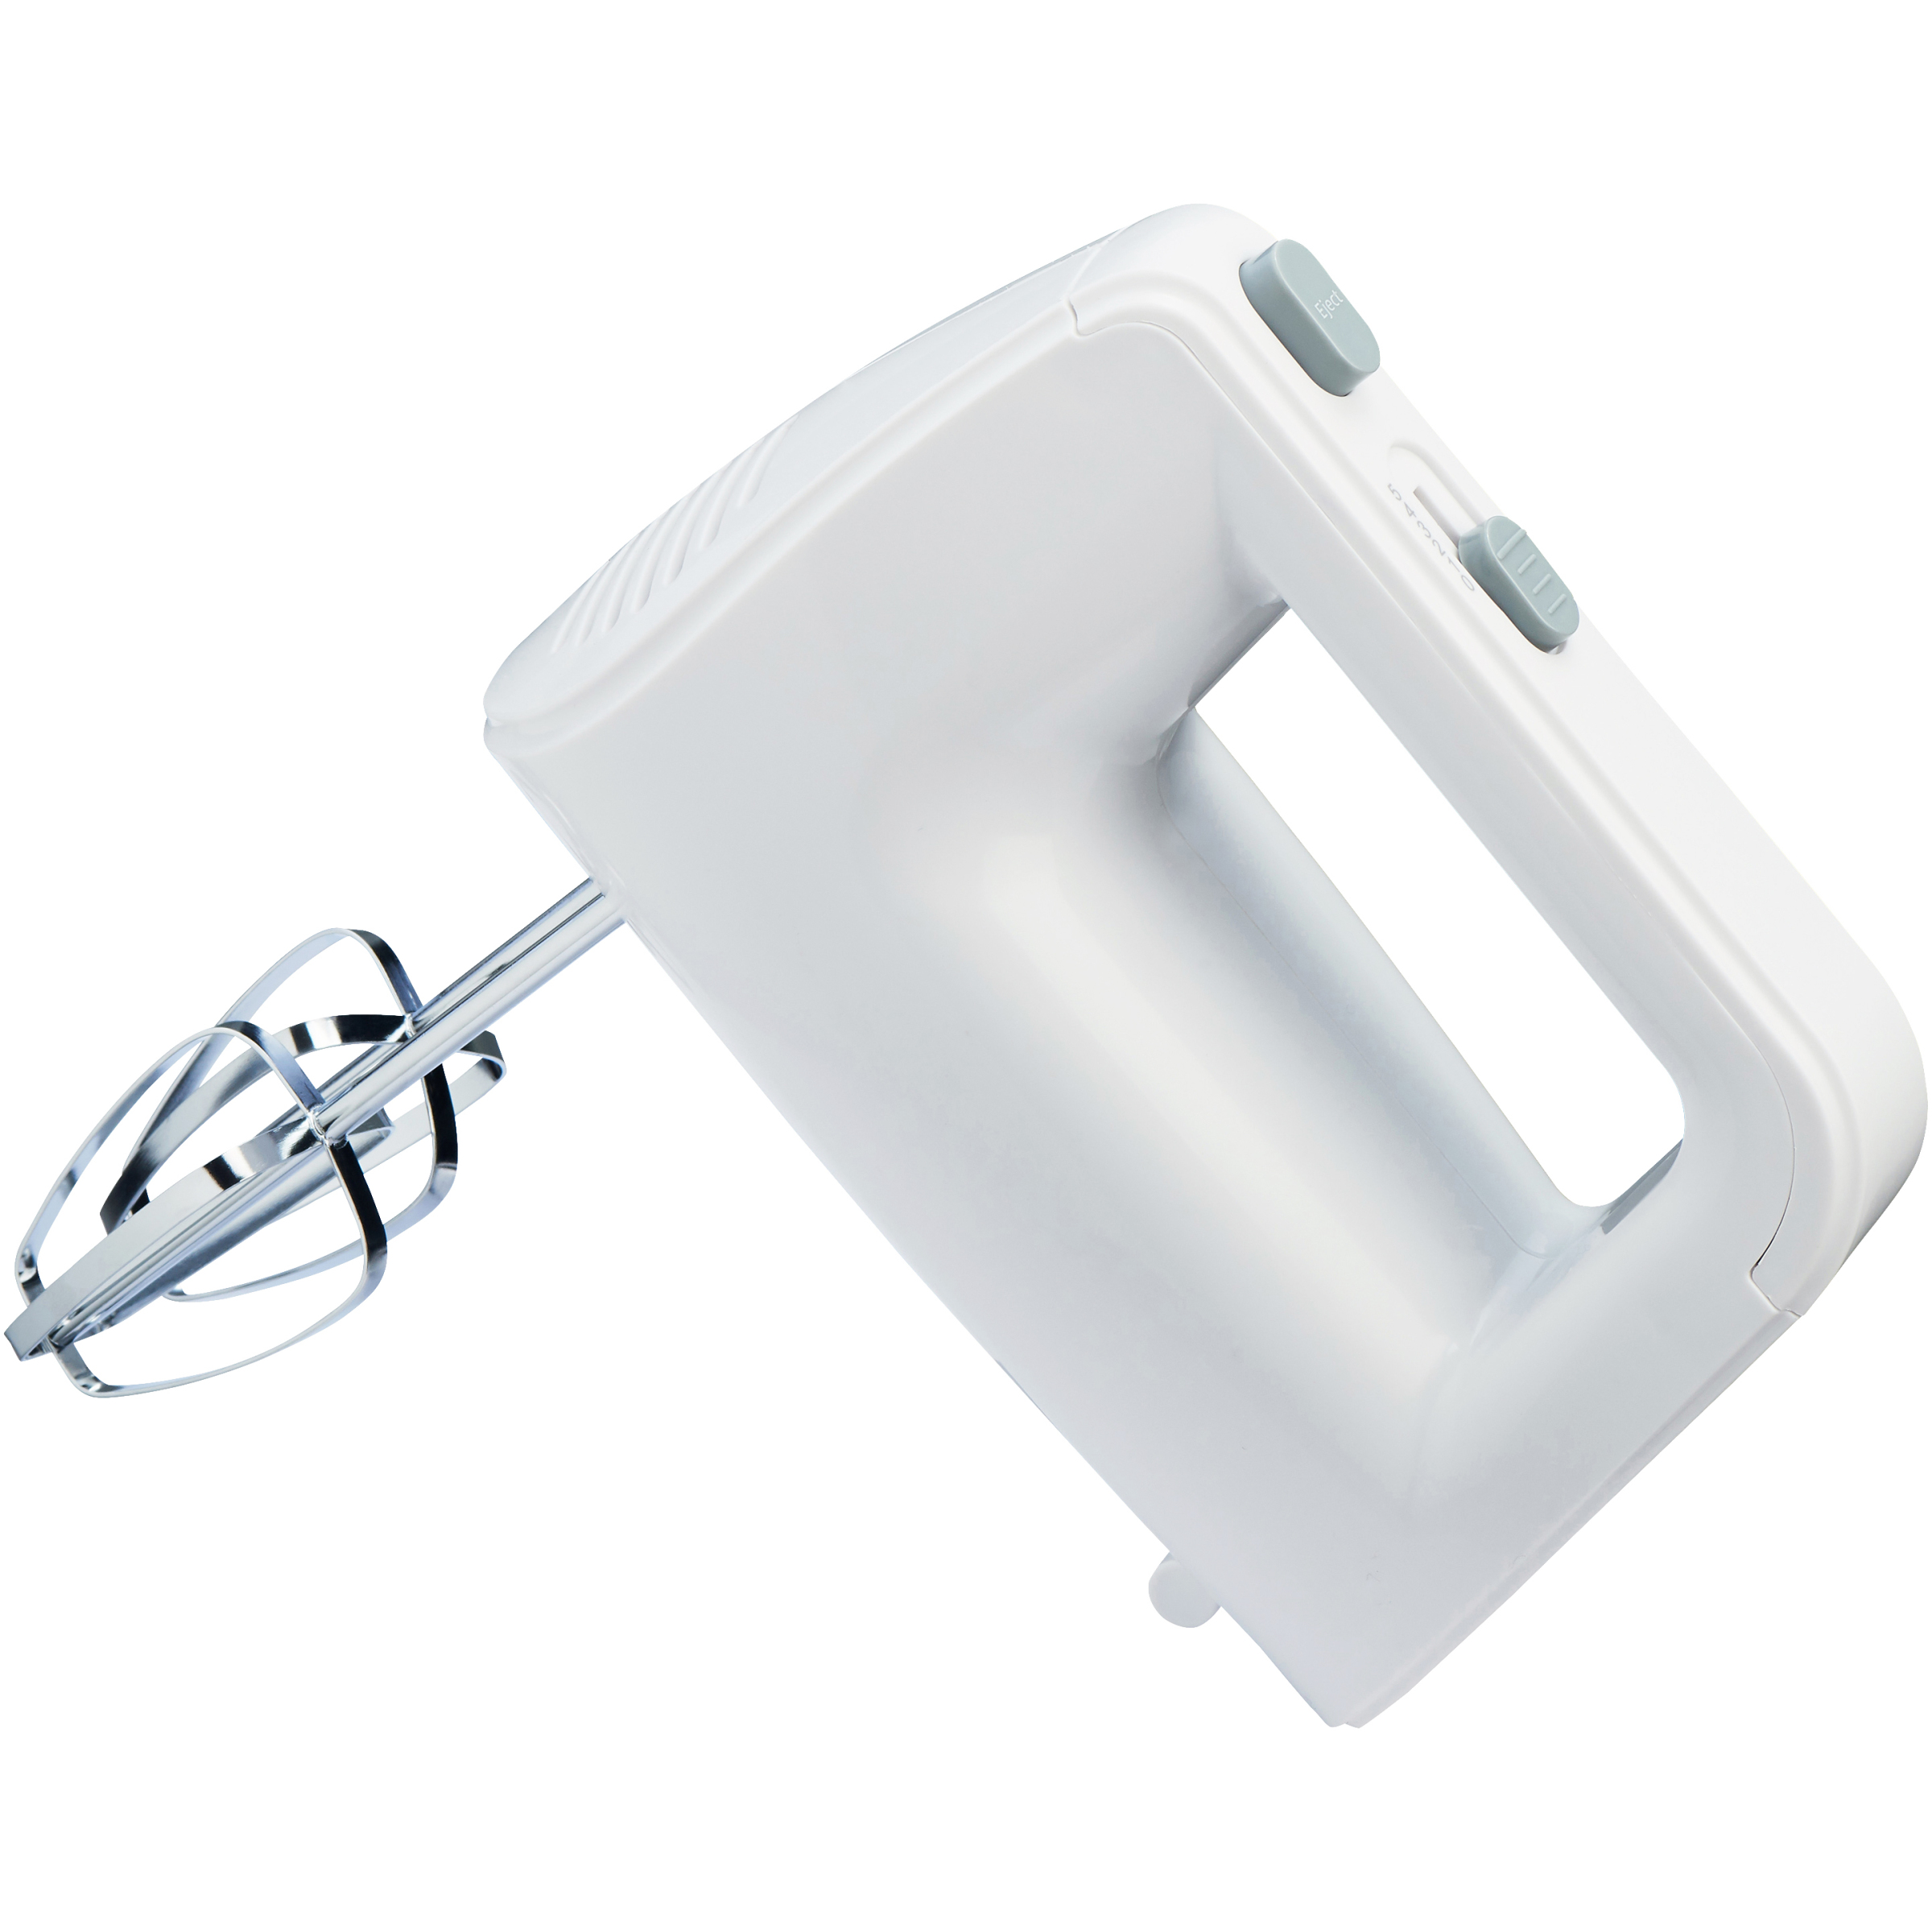 Mainstays 5-Speed 150-Watts Hand Mixer with Chrome Beaters, White - image 1 of 5